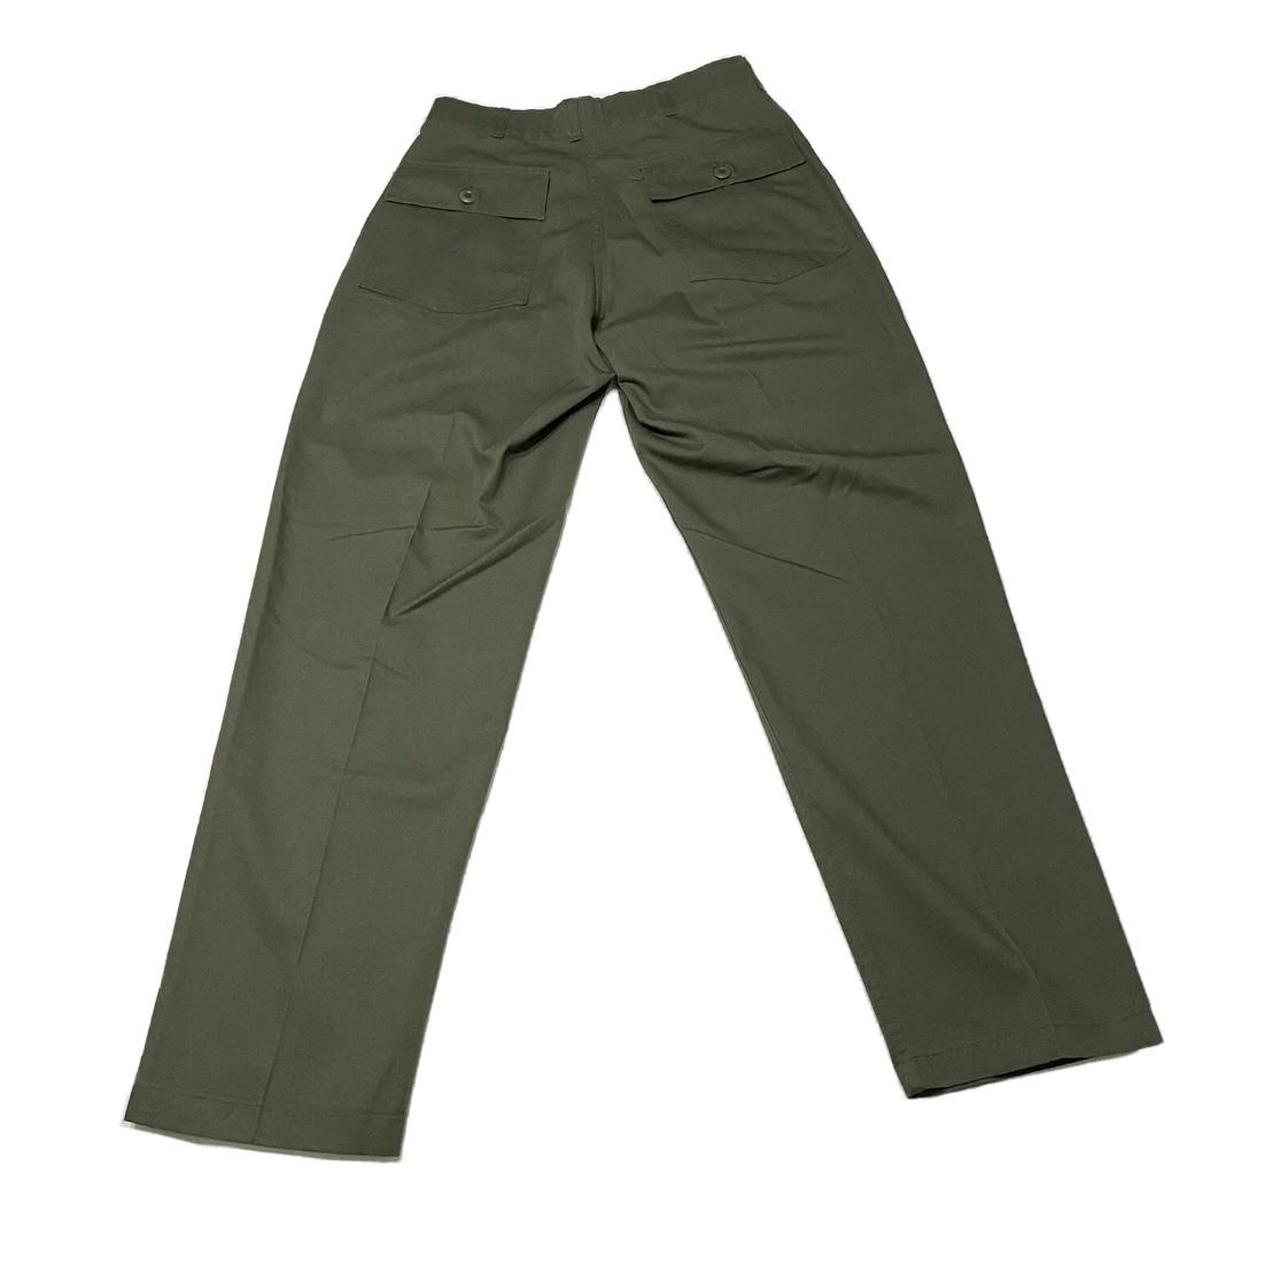 Product Image 2 - Vintage 90’s Olive Green Workwear